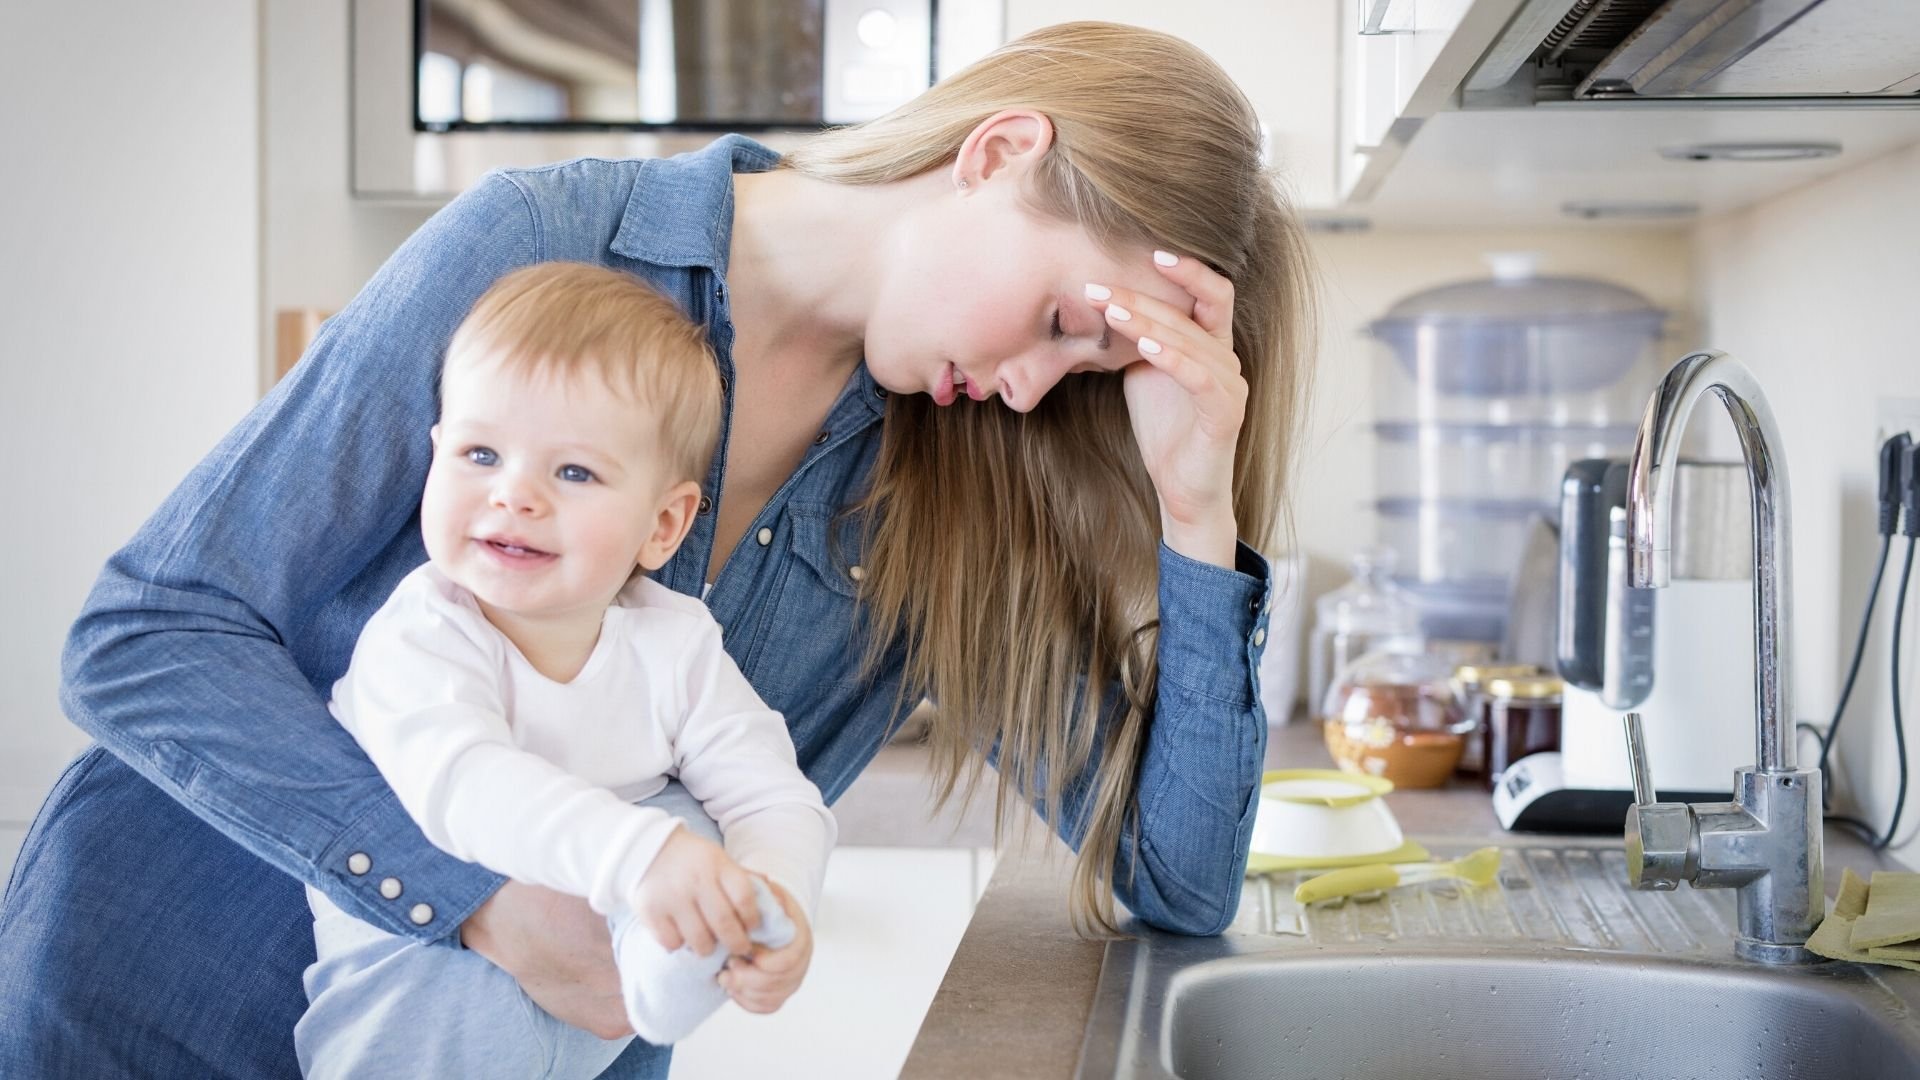 Mother in a blue top holding her baby while feeling guilty about not being the picture-perfect parent